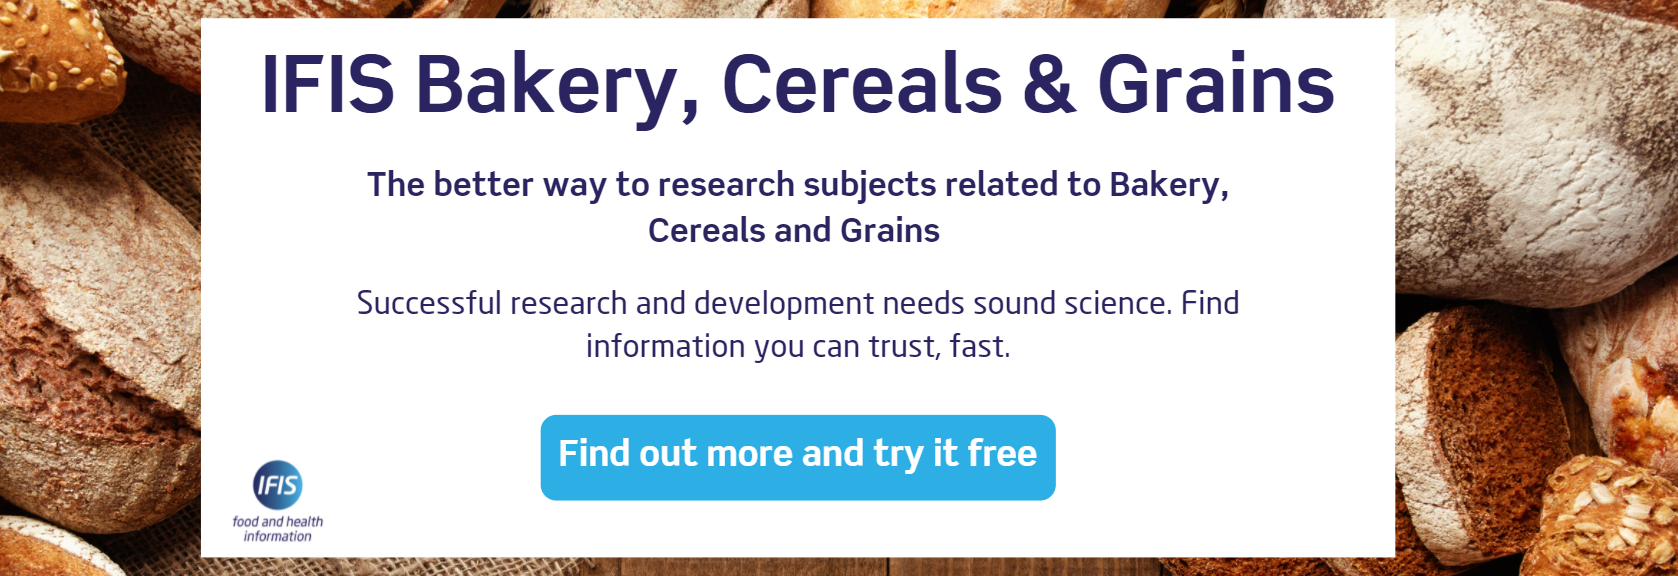 IFIS Bakery, Cereals and Grains CTA-1